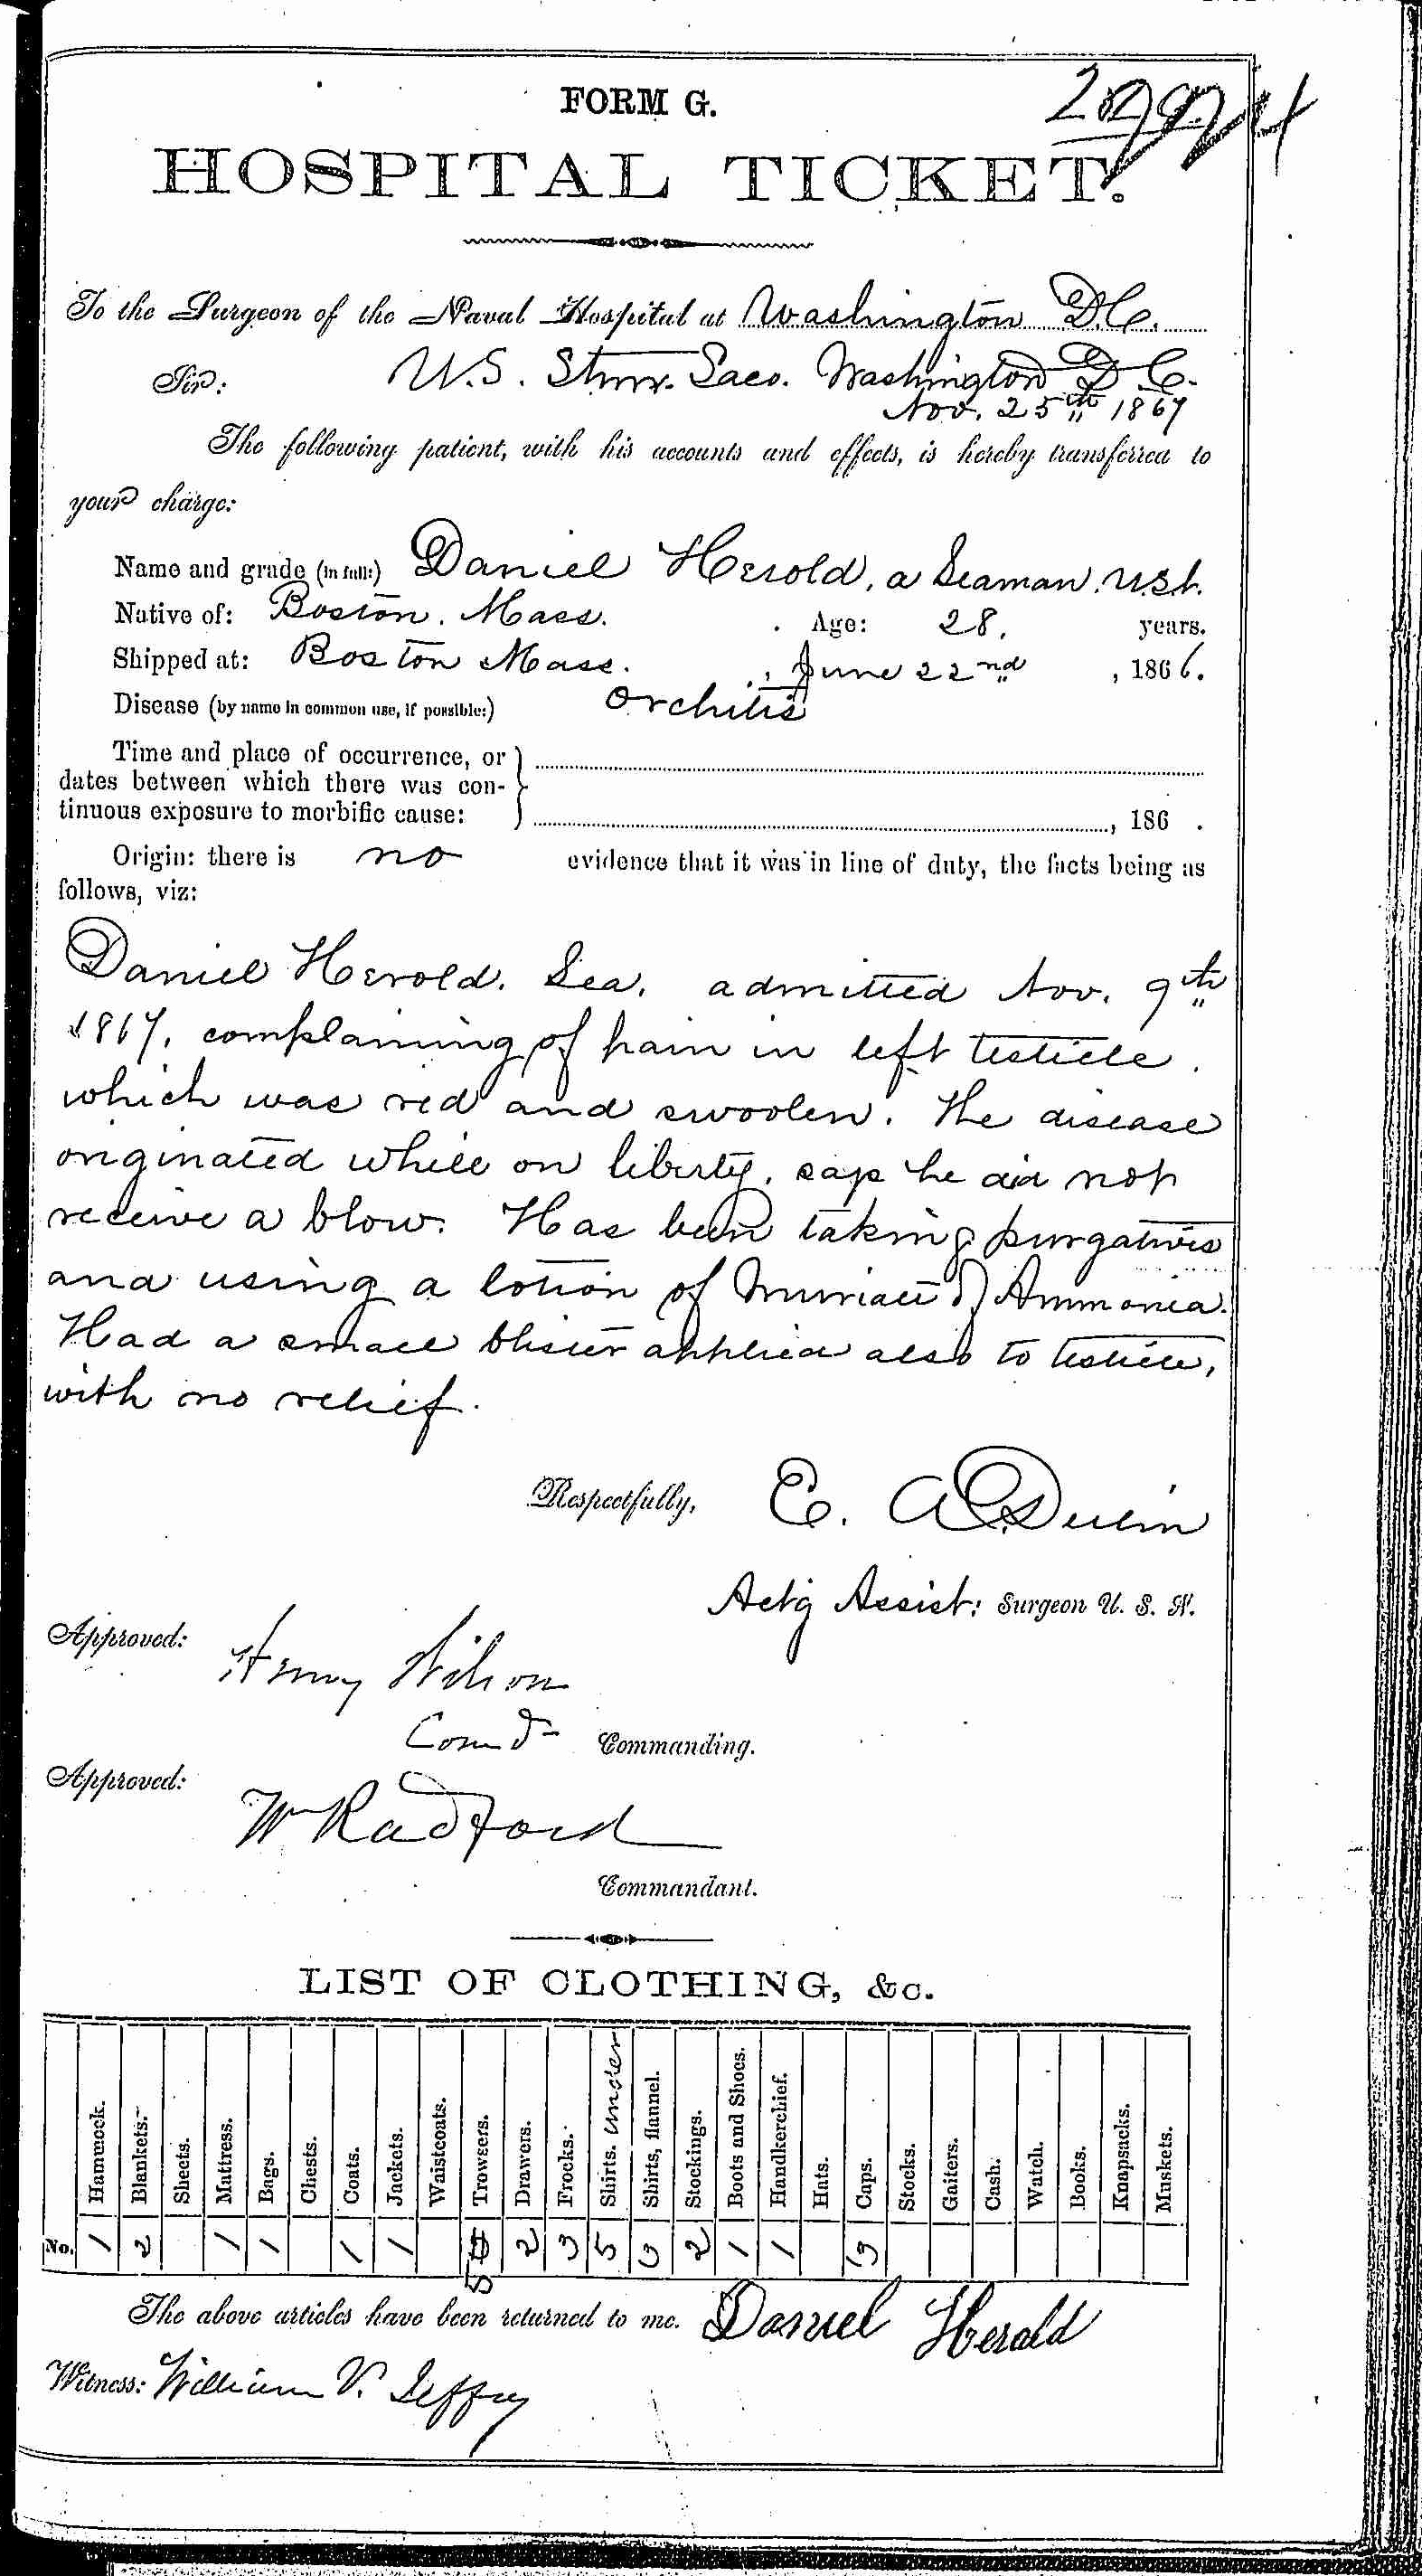 Entry for Daniel Herold (page 1 of 2) in the log Hospital Tickets and Case Papers - Naval Hospital - Washington, D.C. - 1866-68